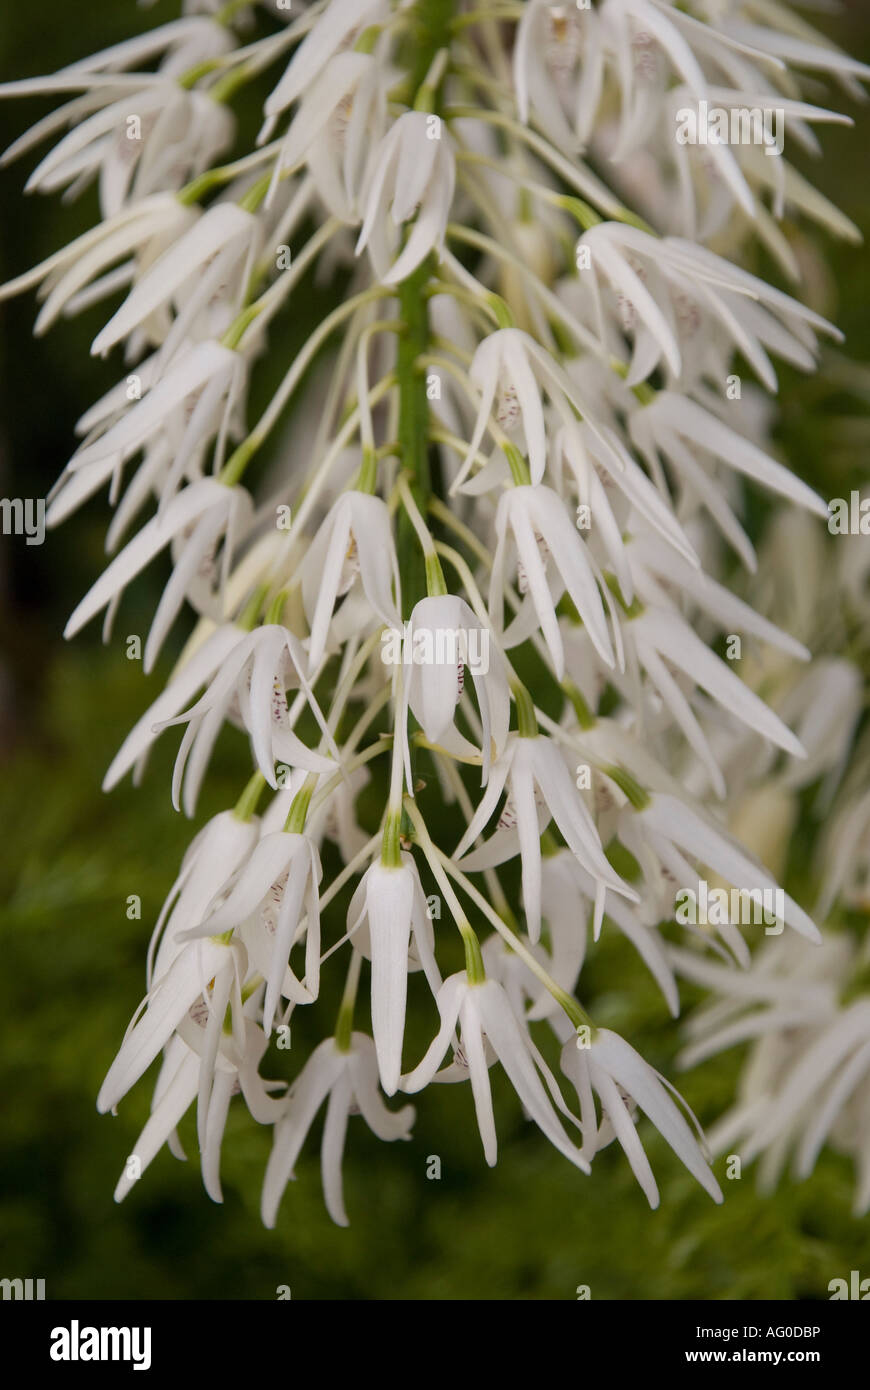 Orchid Dendrobium speciosum fotogrphed in Taman Orchid in Kuala Lumpur, Malaysia Stockfoto